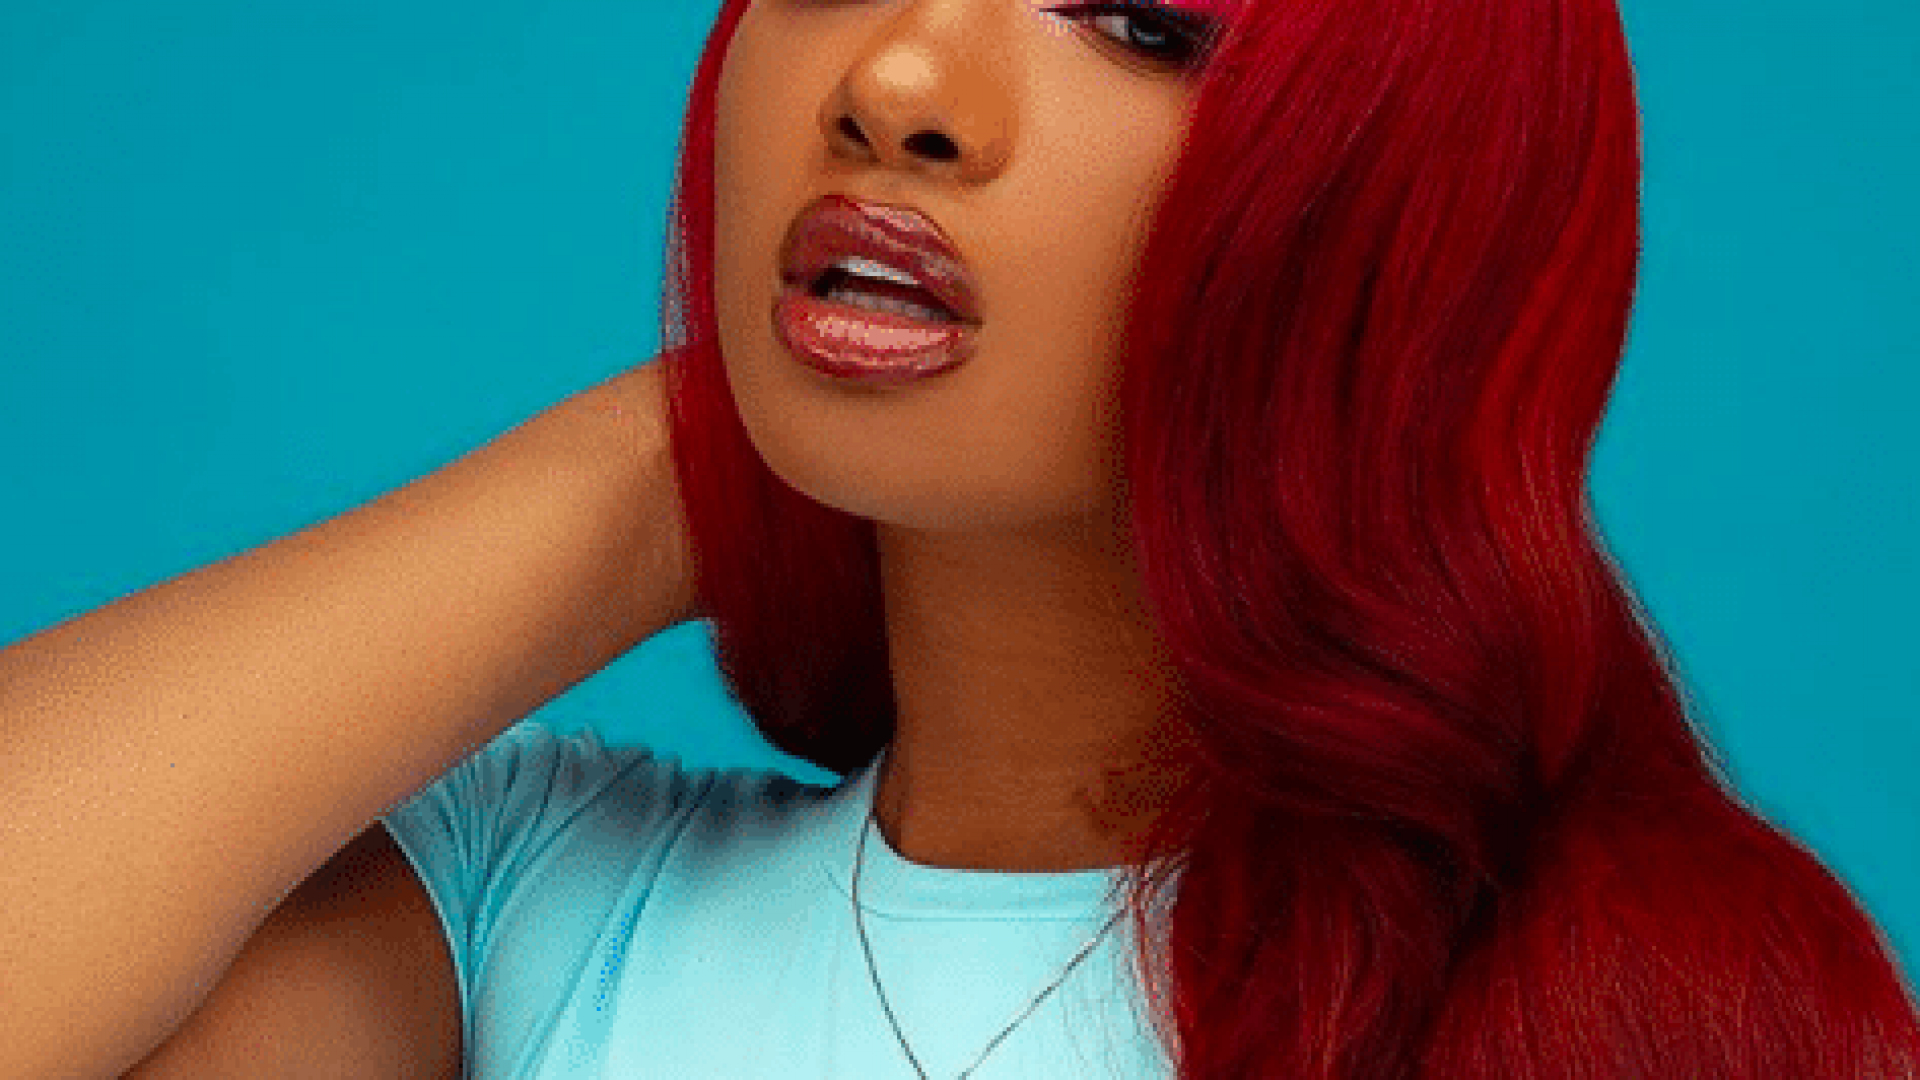 She, The People: Megan Thee Stallion Isn’t A One-Trick Pony